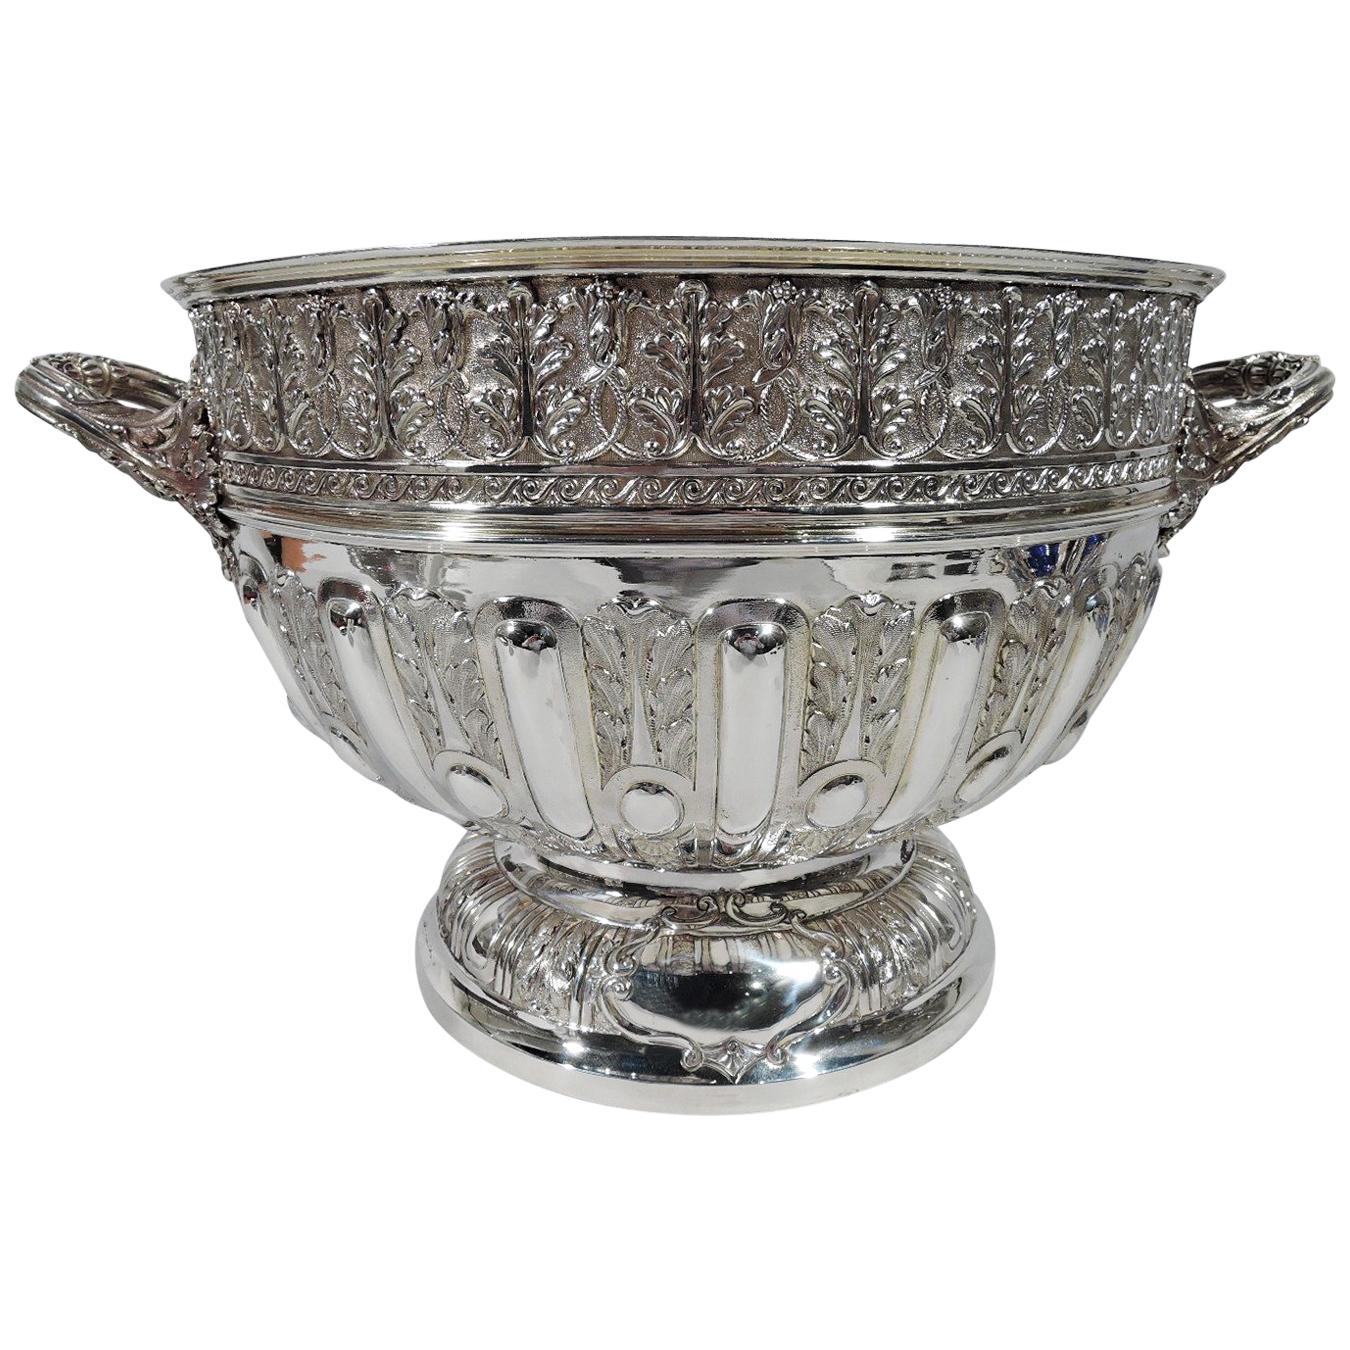 Sumptuous Antique English Sterling Silver Classical Centerpiece Punch Bowl